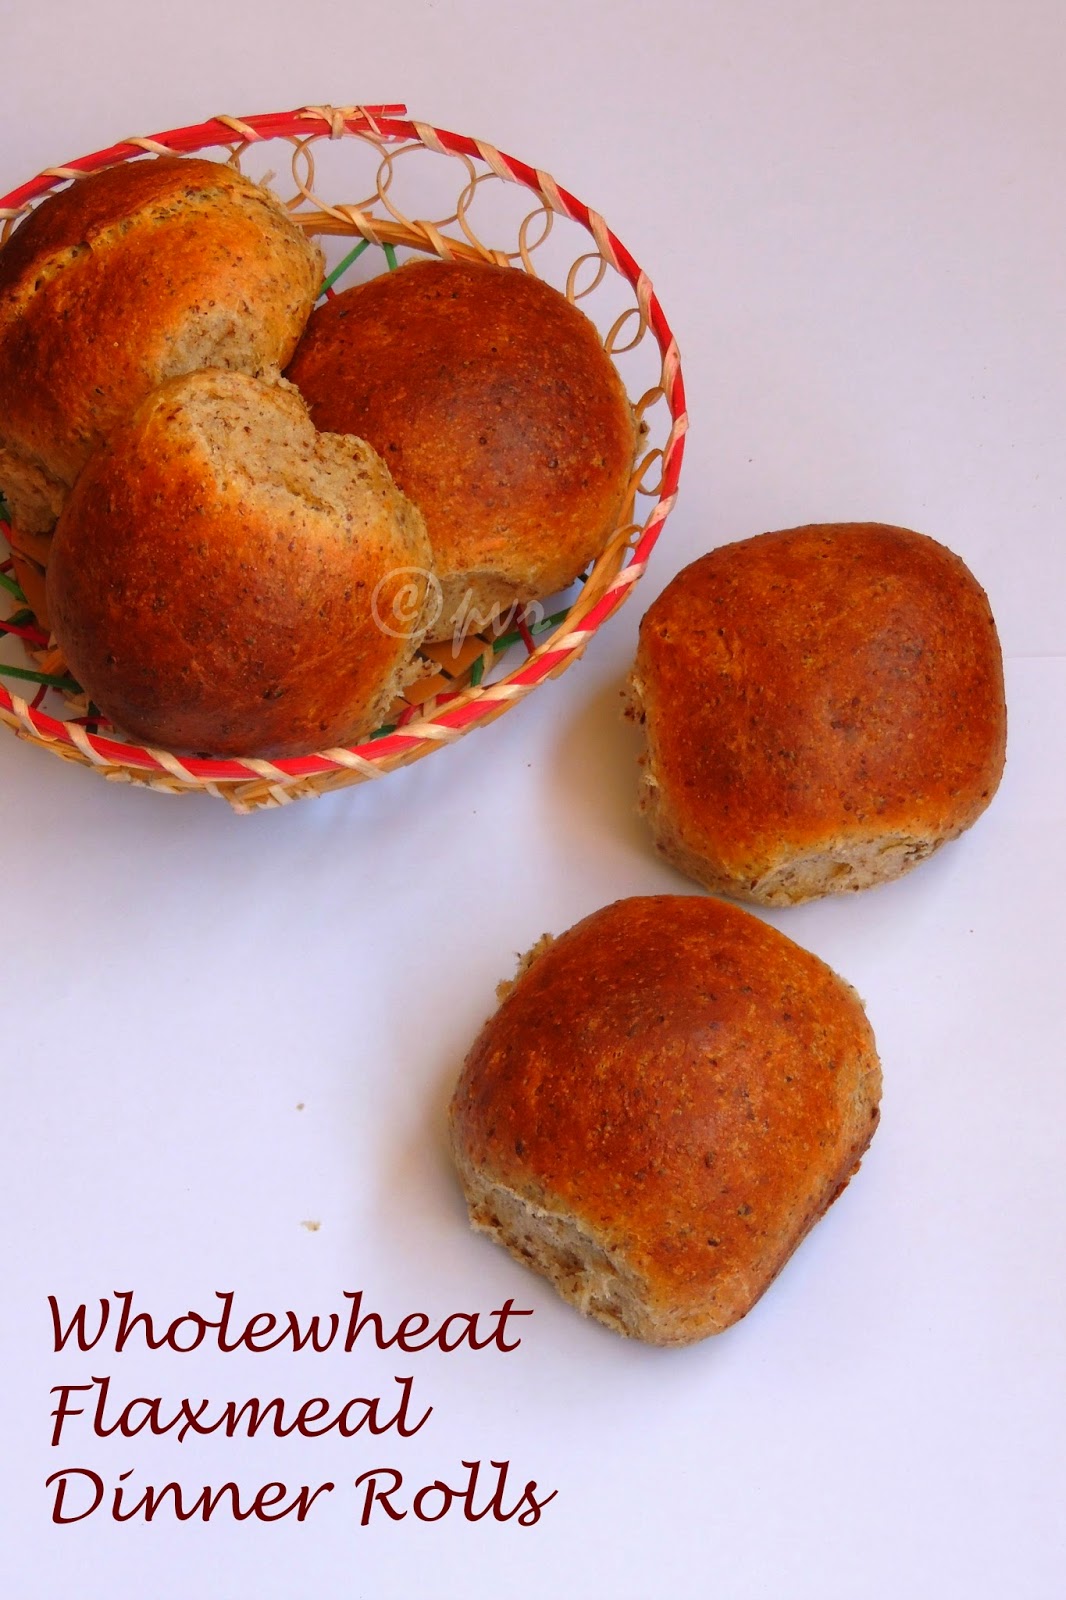 No Butter Wholewheat flaxmeal Dinner Rolls